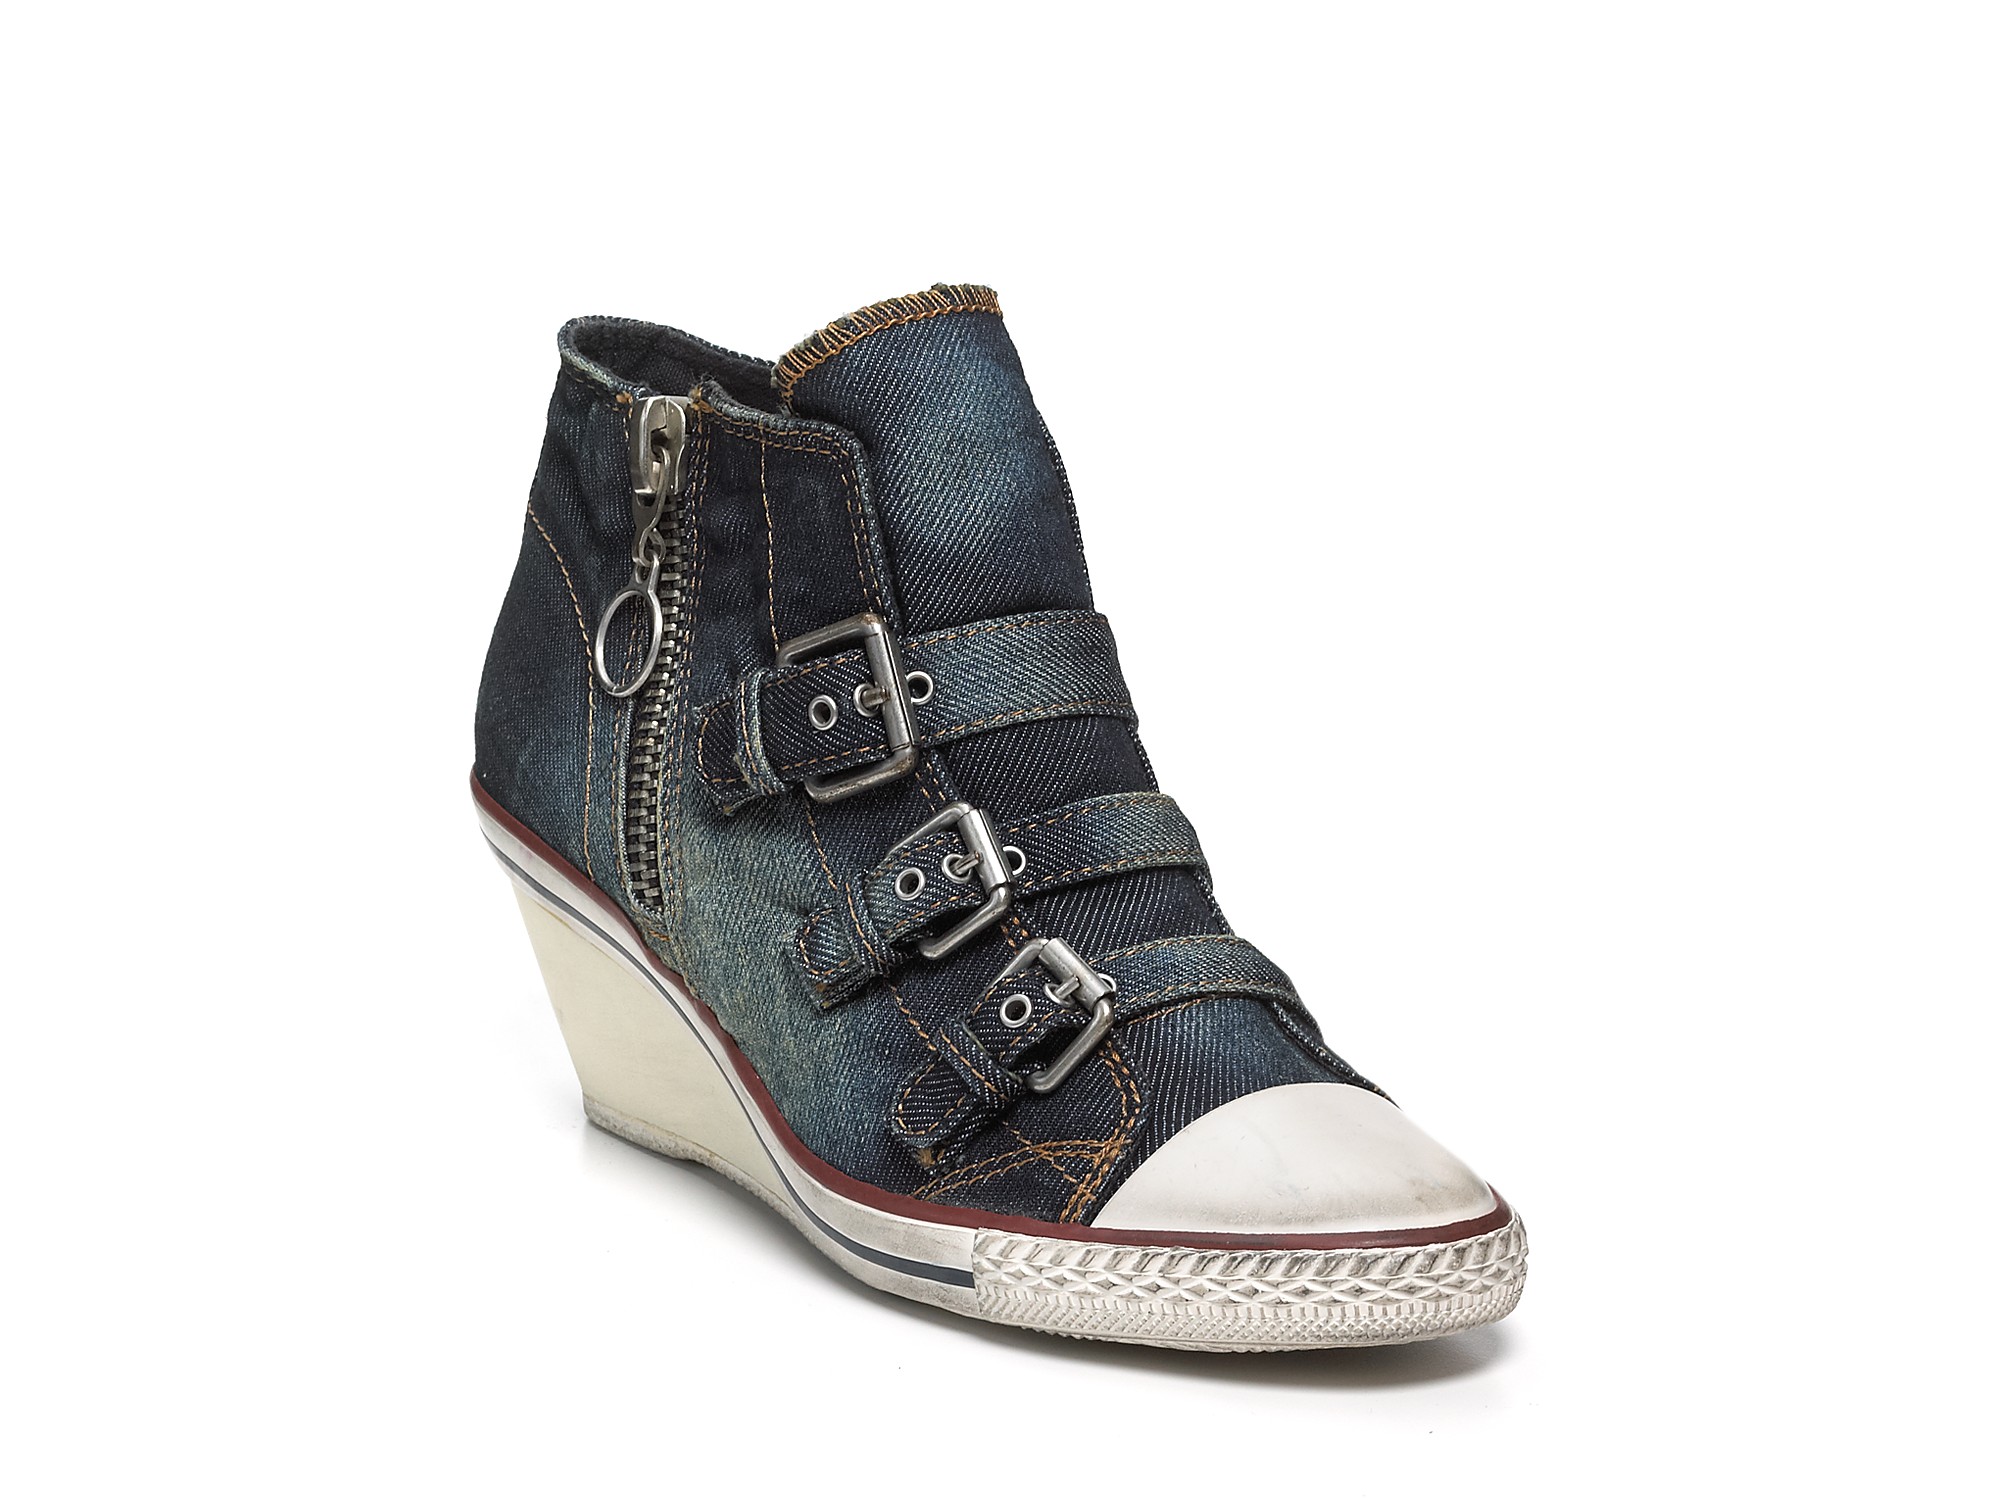 Lyst - Ash Wedges Gin Sneakers in Blue